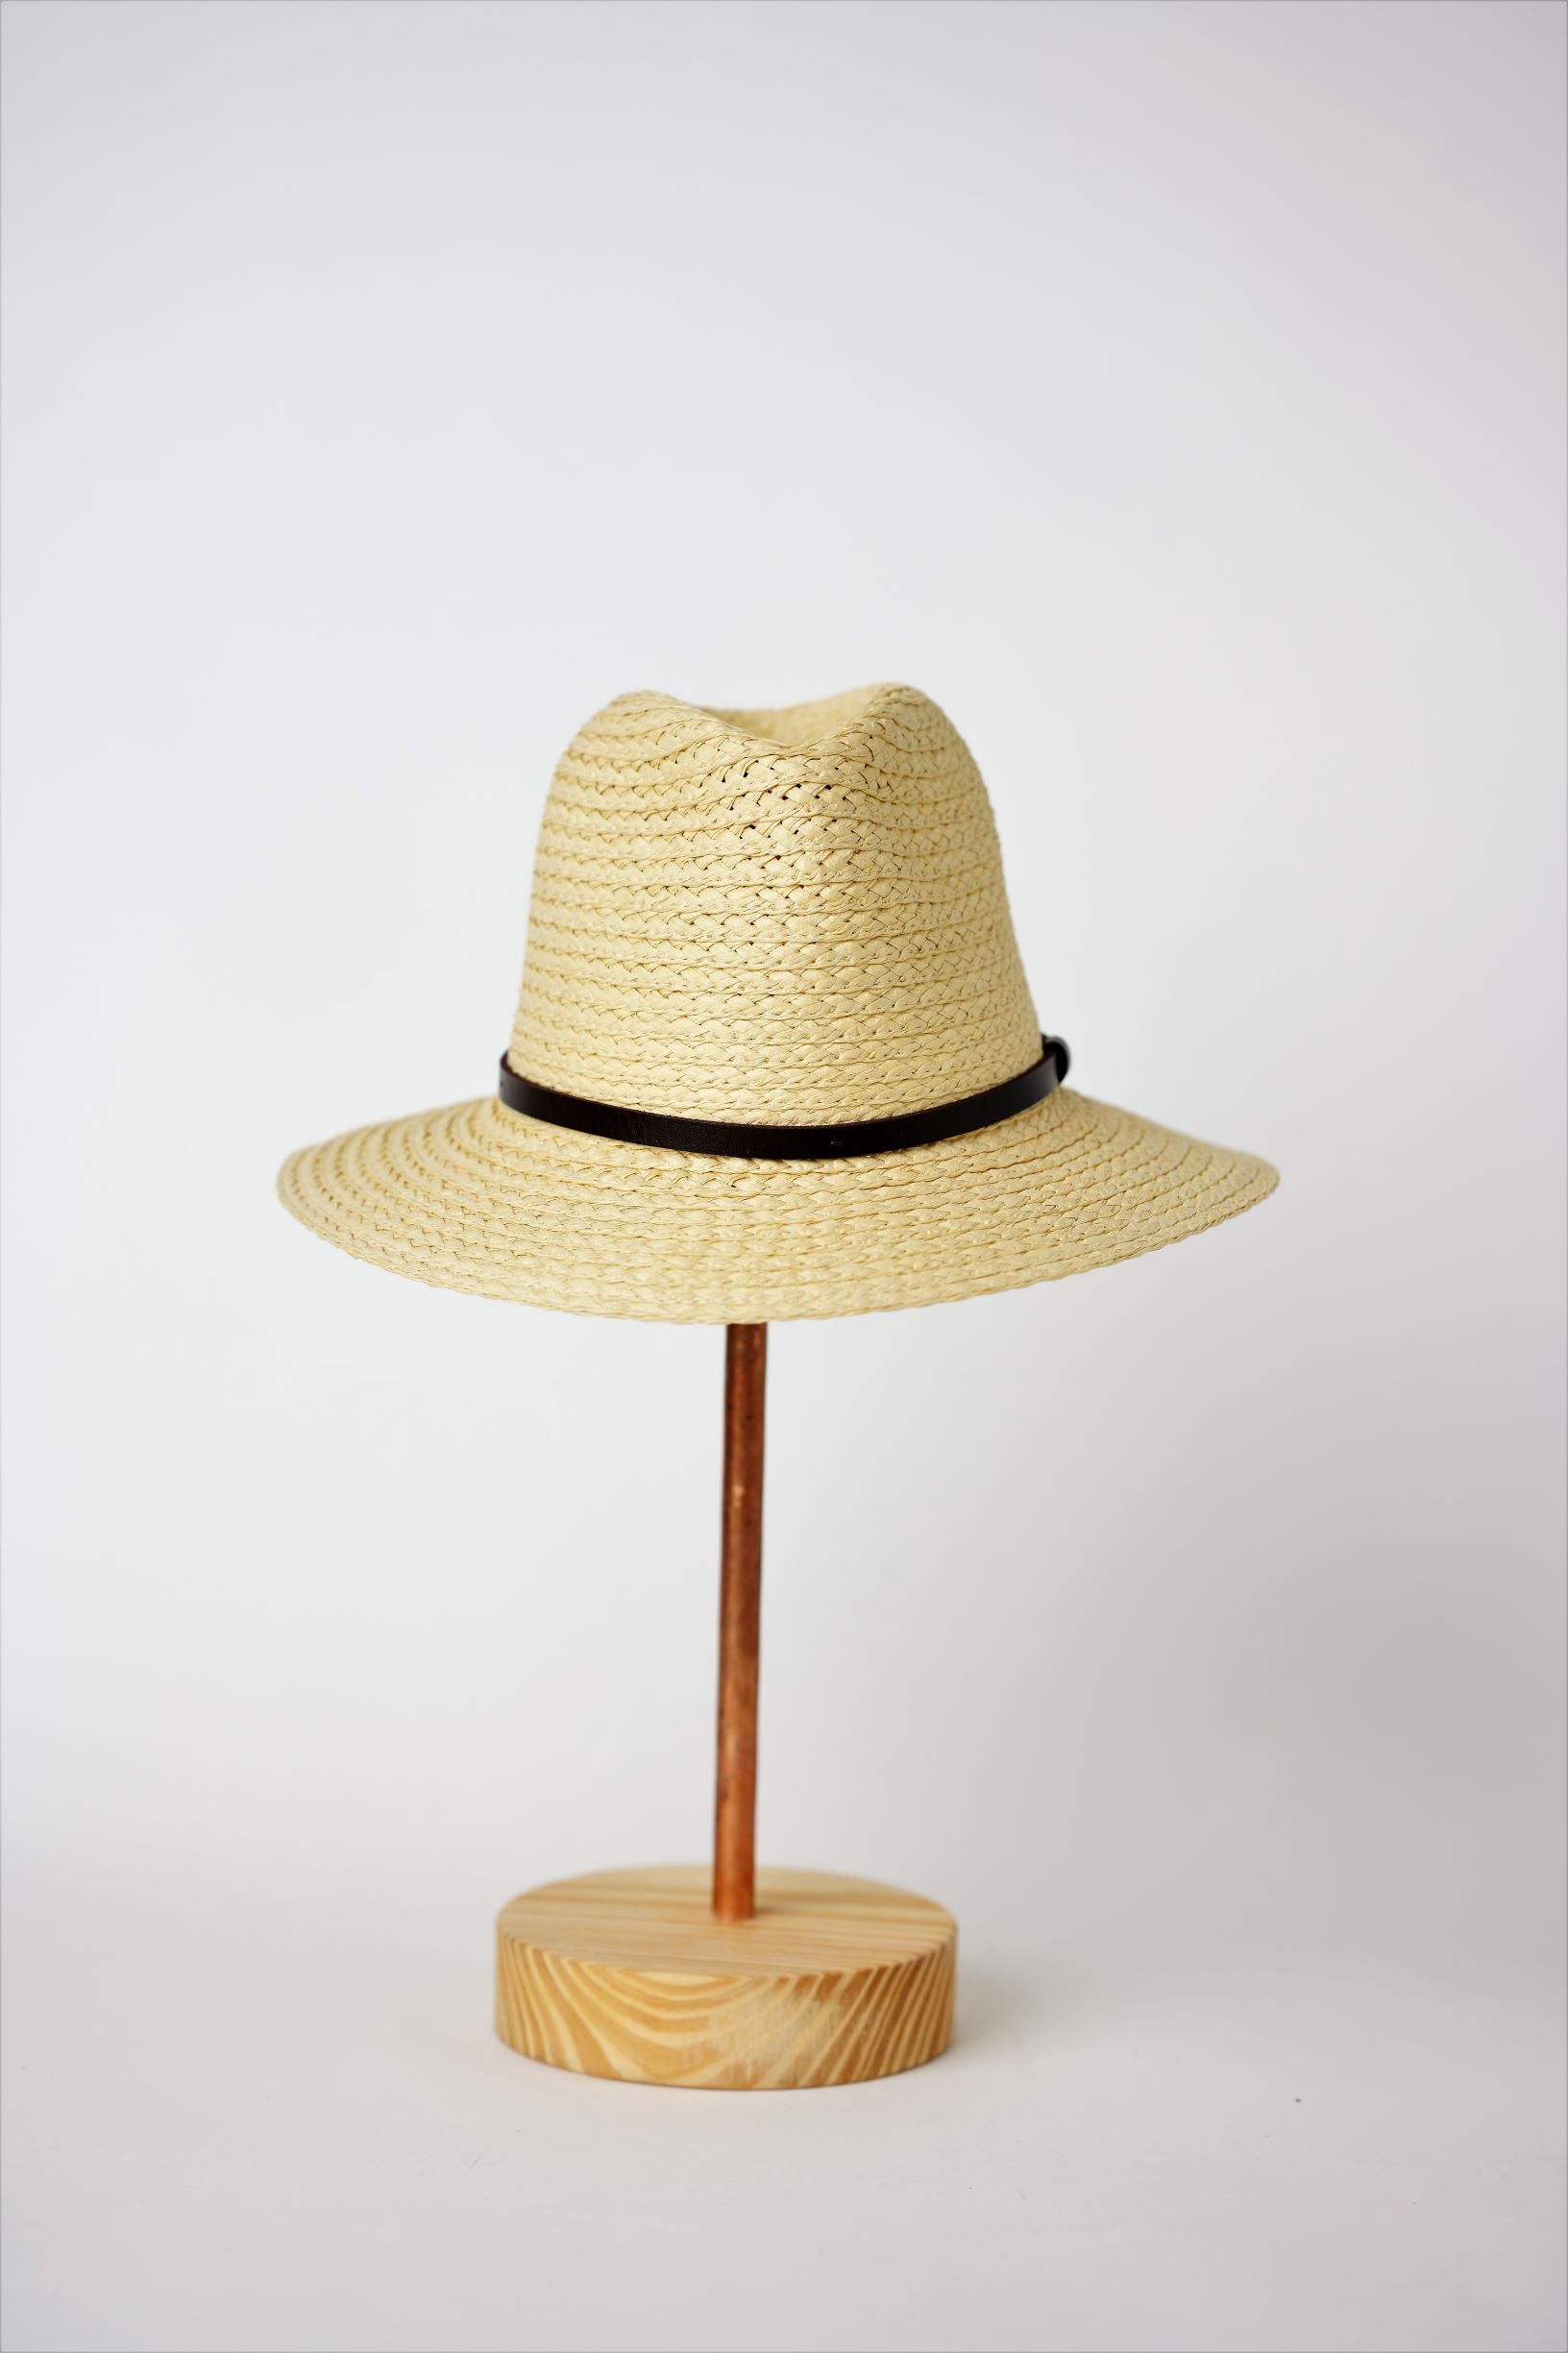 Natural straw panama hat with thin brown leather band.